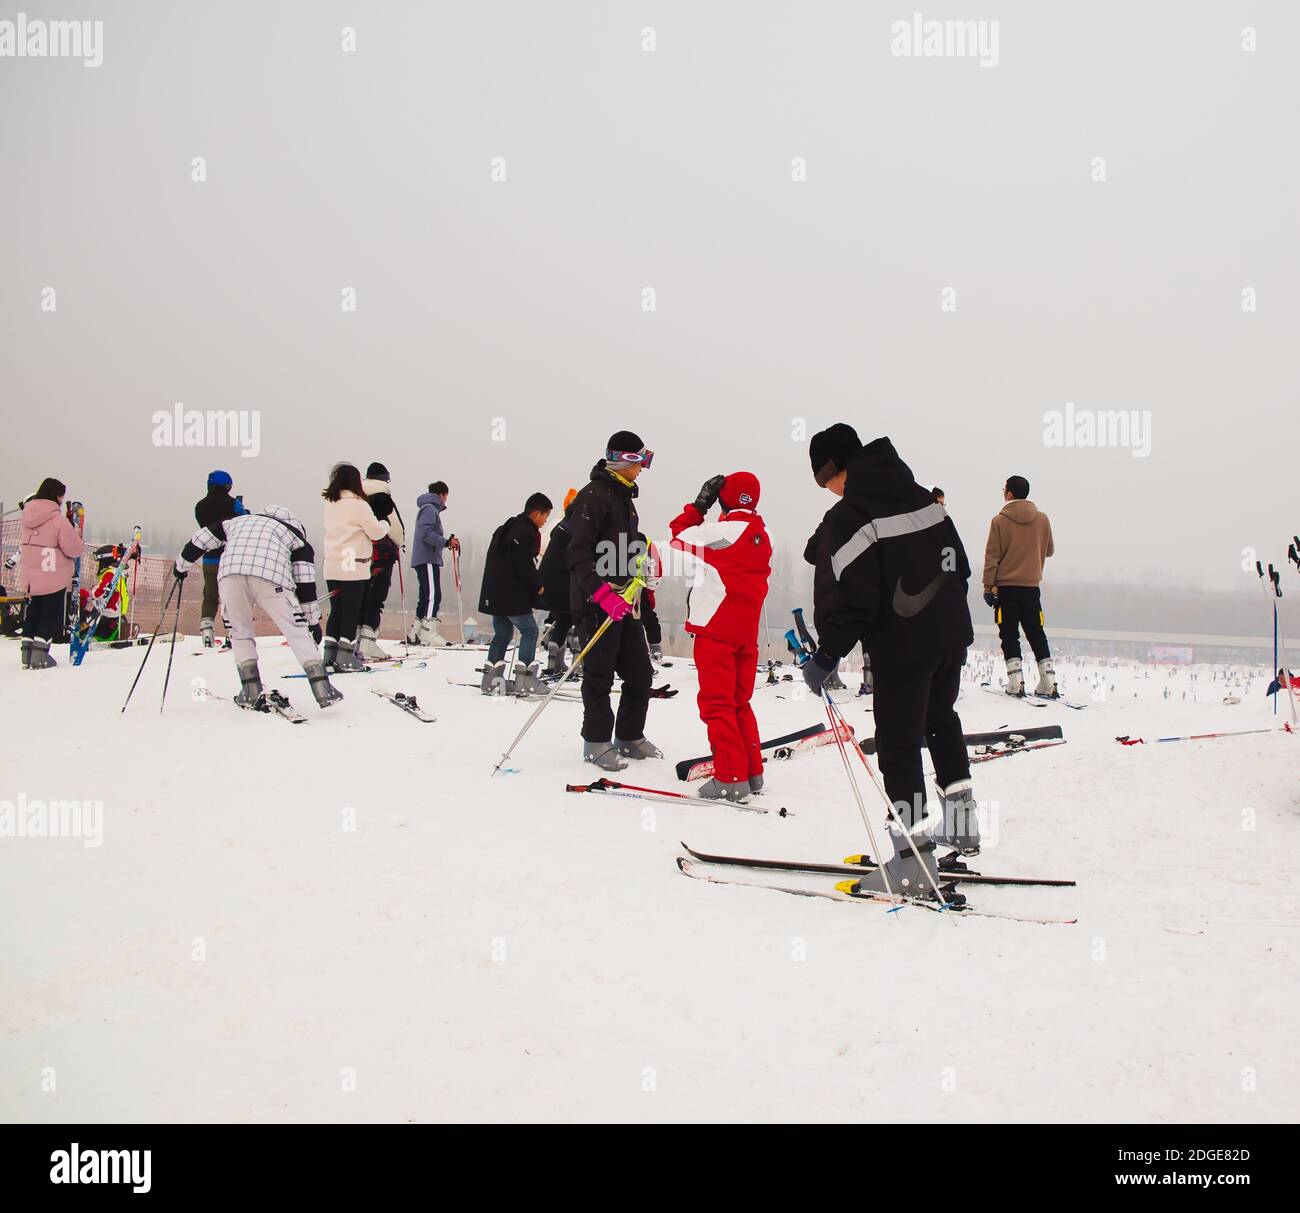 people are exciting and learning skiing at a holiday Stock Photo